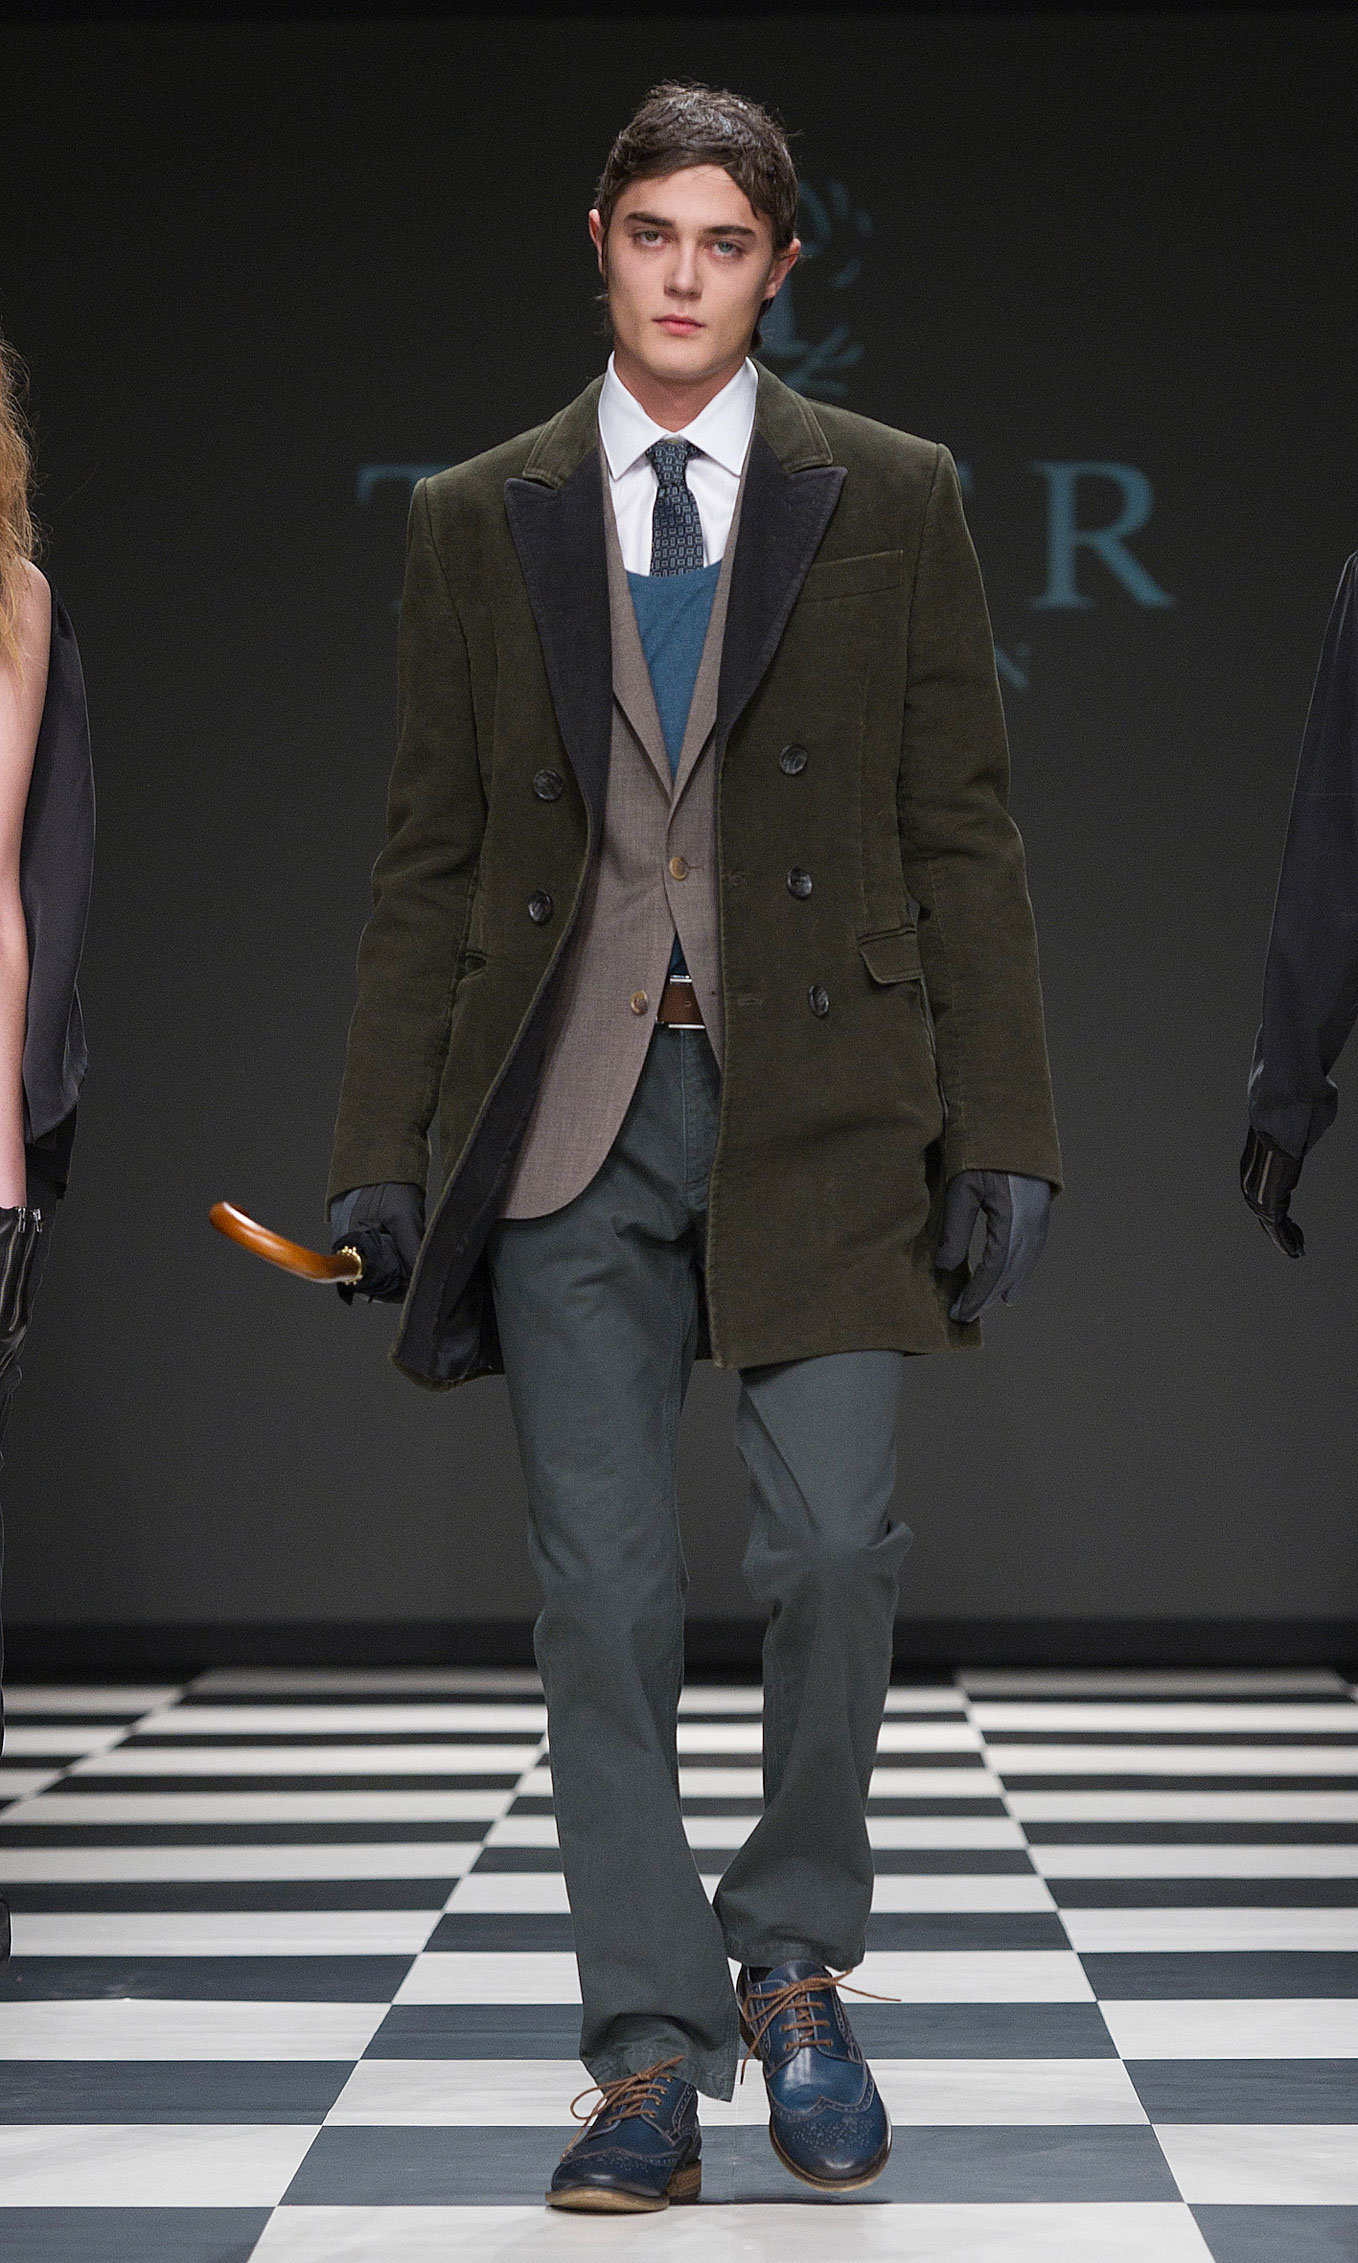 Tiger Of Sweden fall winter 2011/12 collection